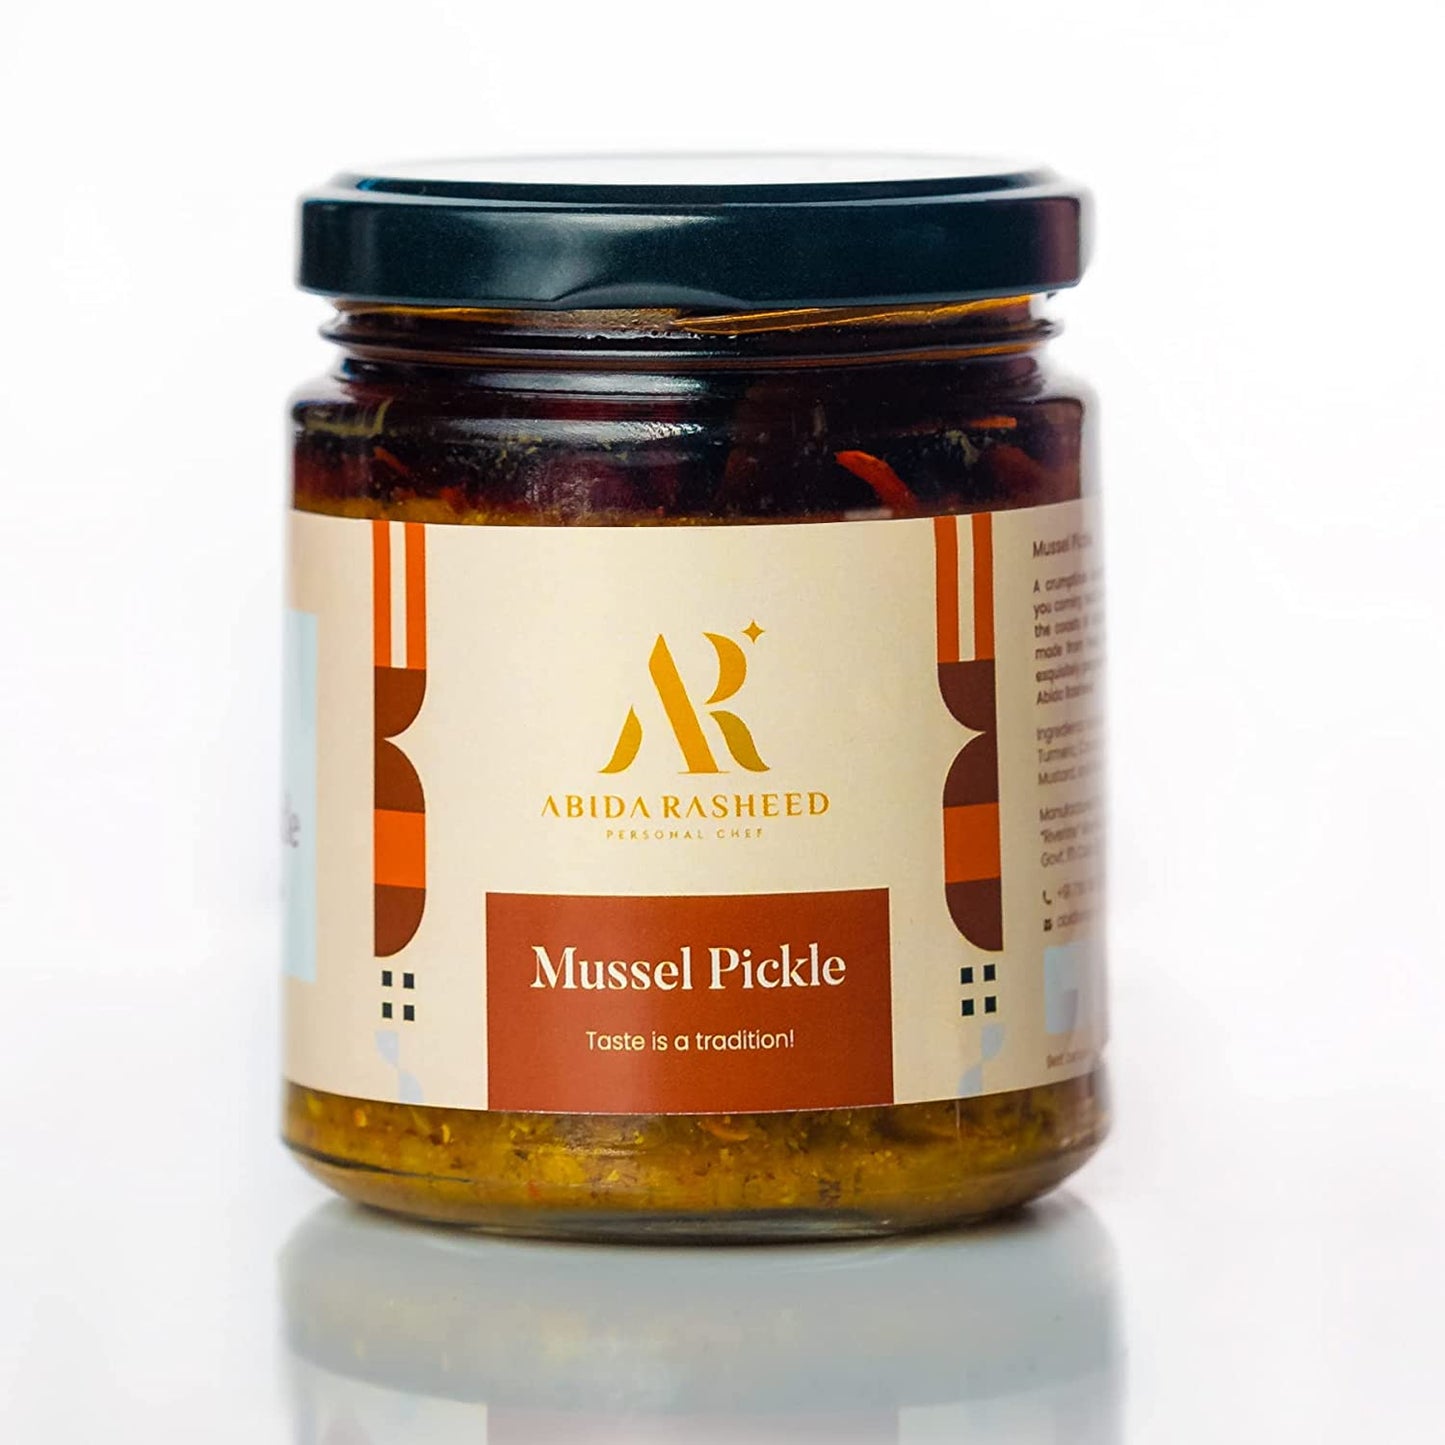 Abida Rasheed's Homemade Special Mixed Pickles Combo | Prawn Pickle (200g) | Bufallo Meat Pickle (200g) | Mussel Pickle (200g)